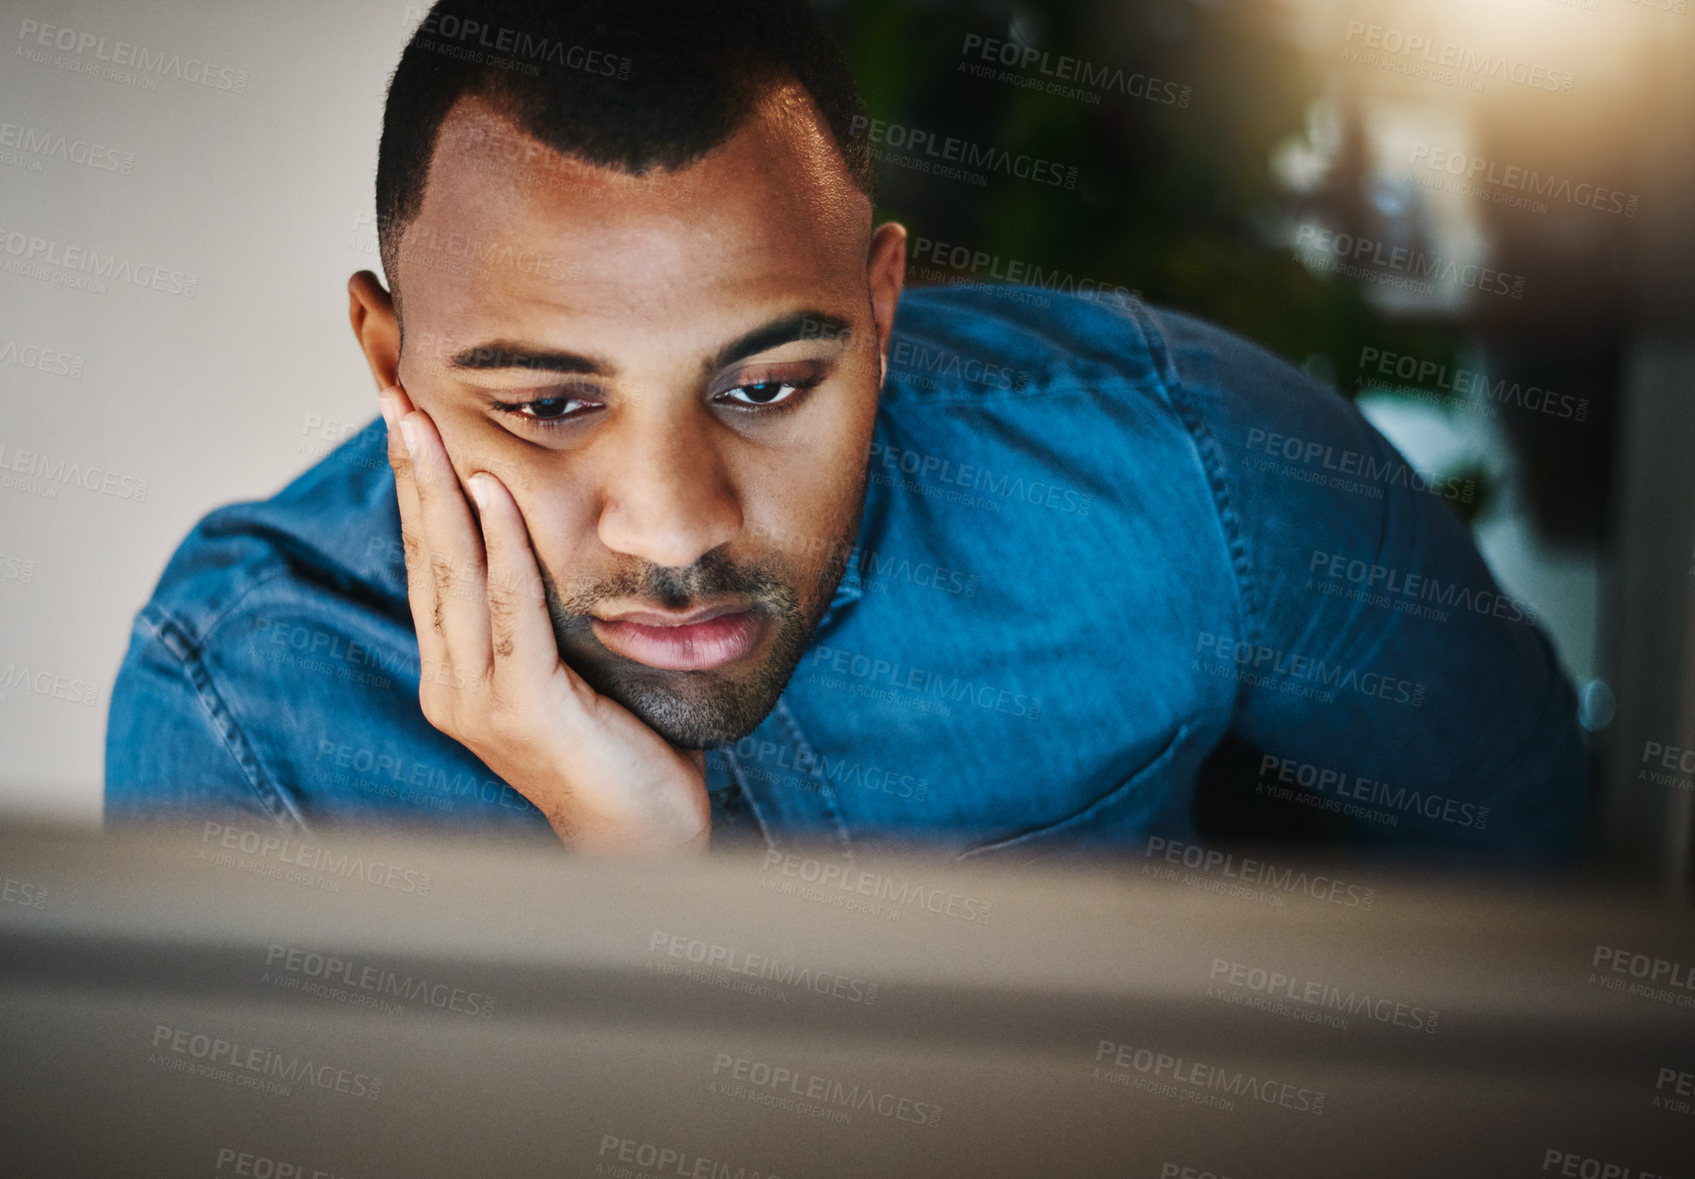 Buy stock photo Shot of a young businessman looking bored while working during a late night in a modern office